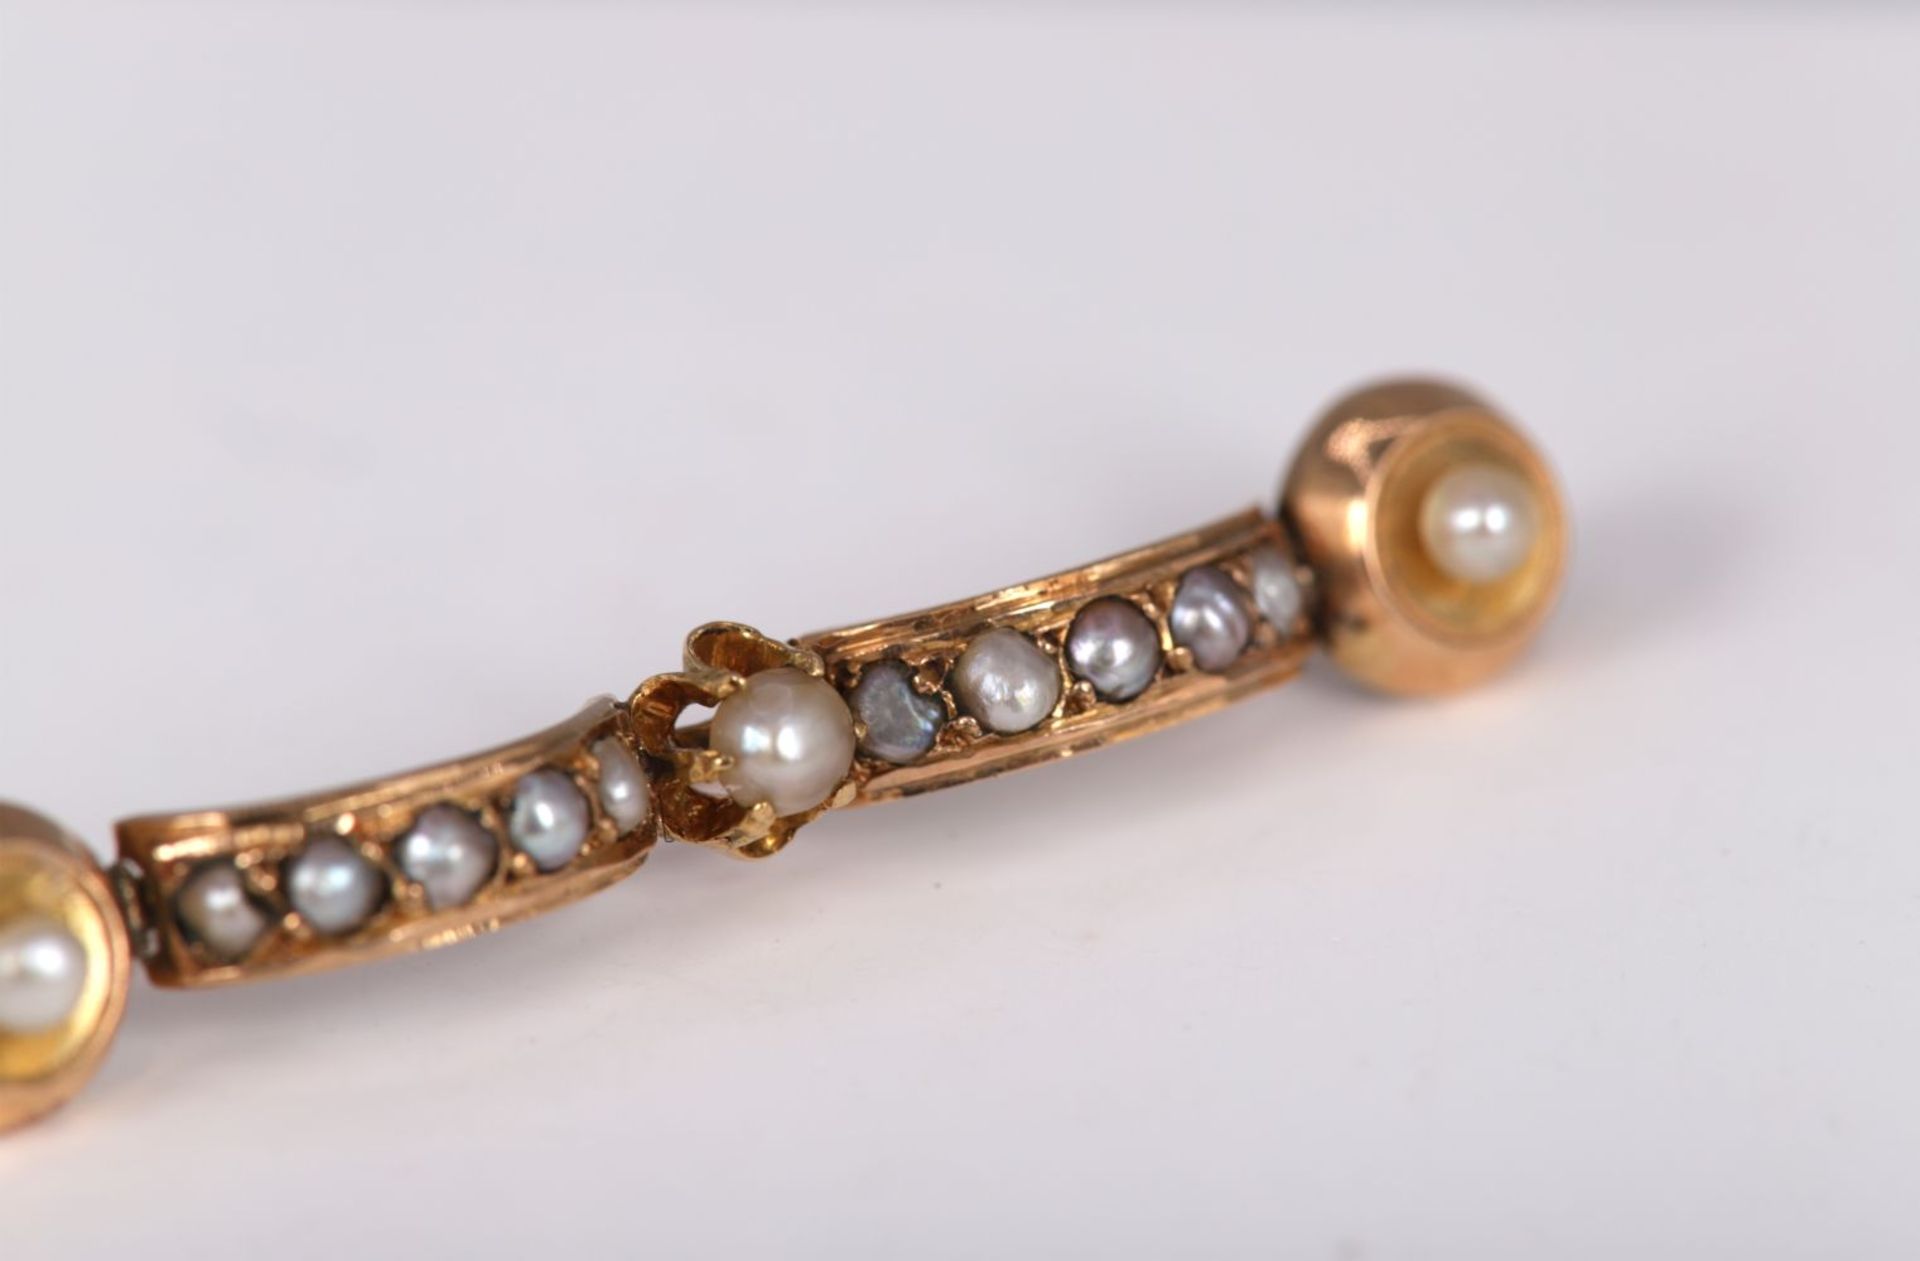 18K GOLD & PEARL BROOCH - Image 3 of 3